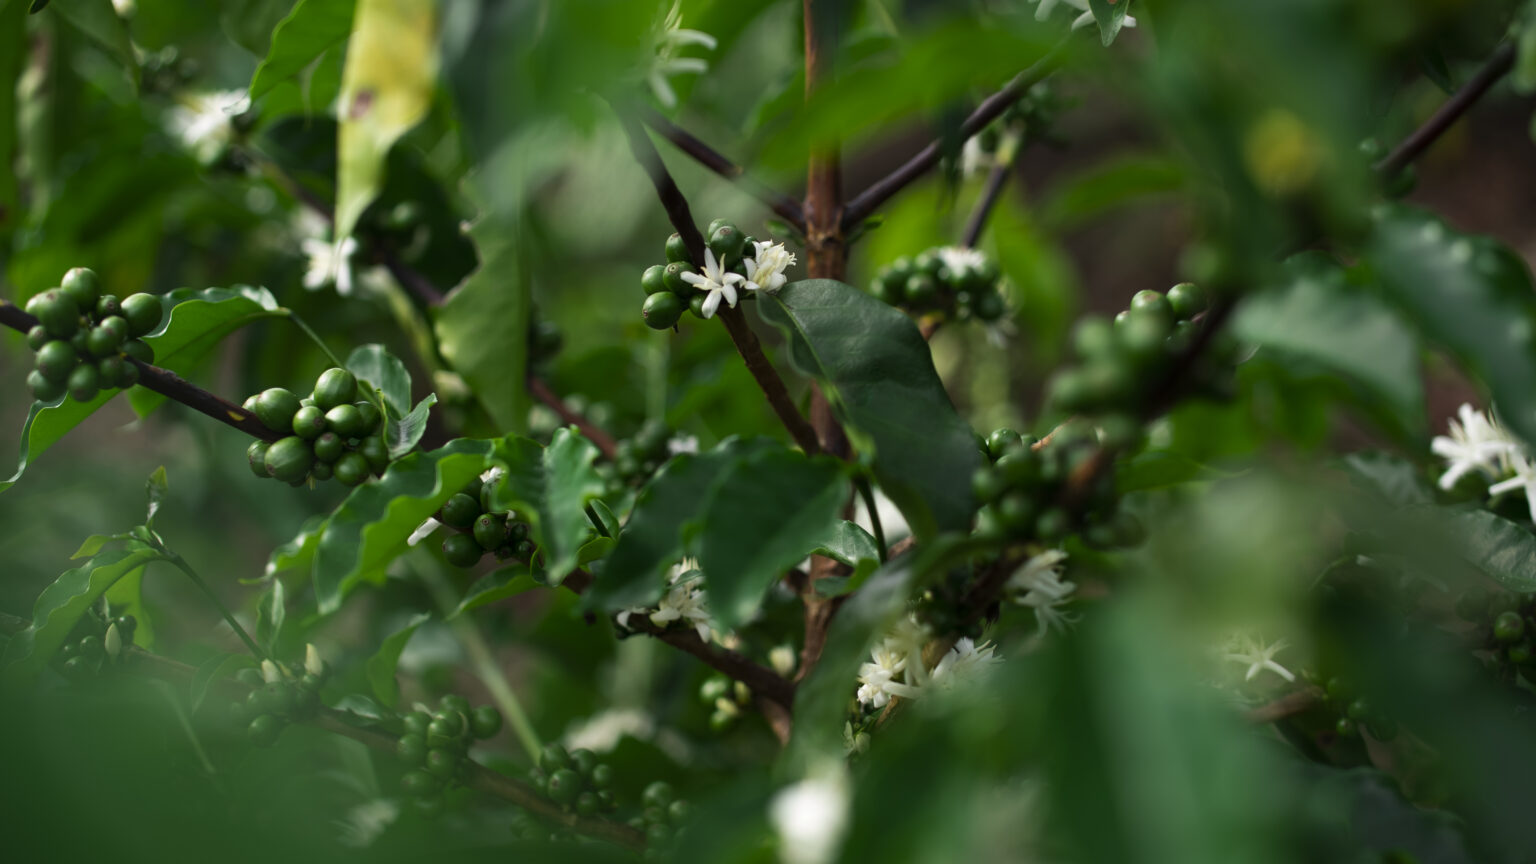 Moody image dark green leaves of coffee tree with blossoming white jasmine coffee flowers and cherry coffee beans